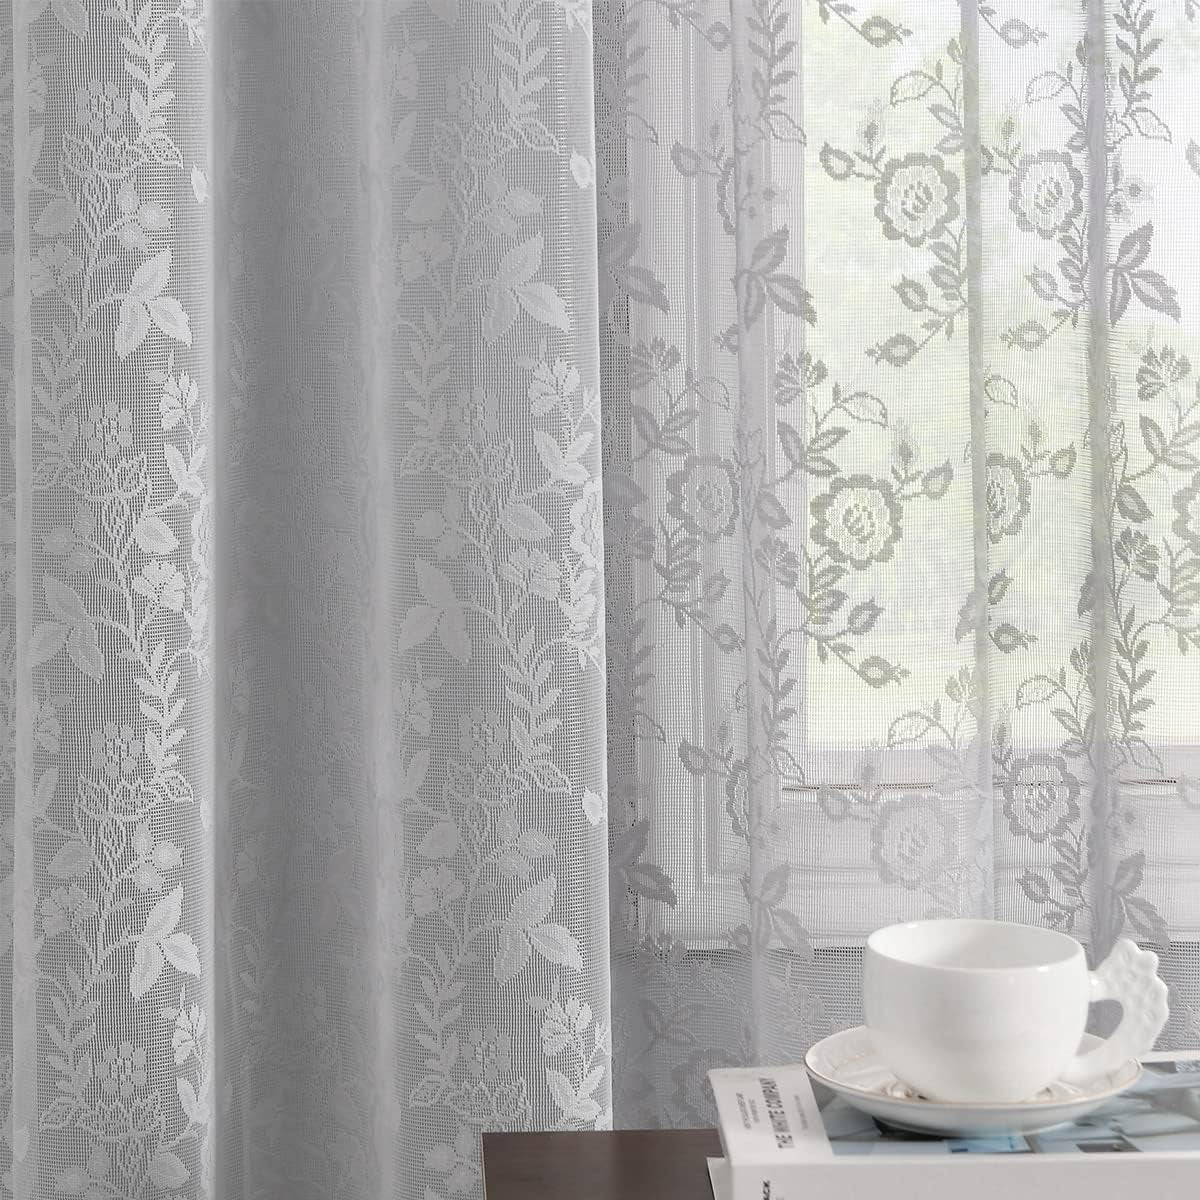 FINECITY Lace Curtains Country Rustic Floral Sheer Curtains for Living Room 72 Inch Length Drapes Vintage Floral Pattern Farmhouse Privacy Light Filtering Sheer Curtain 2 Panels, 52 X 72 Inch, Grey  Keyu Textile   